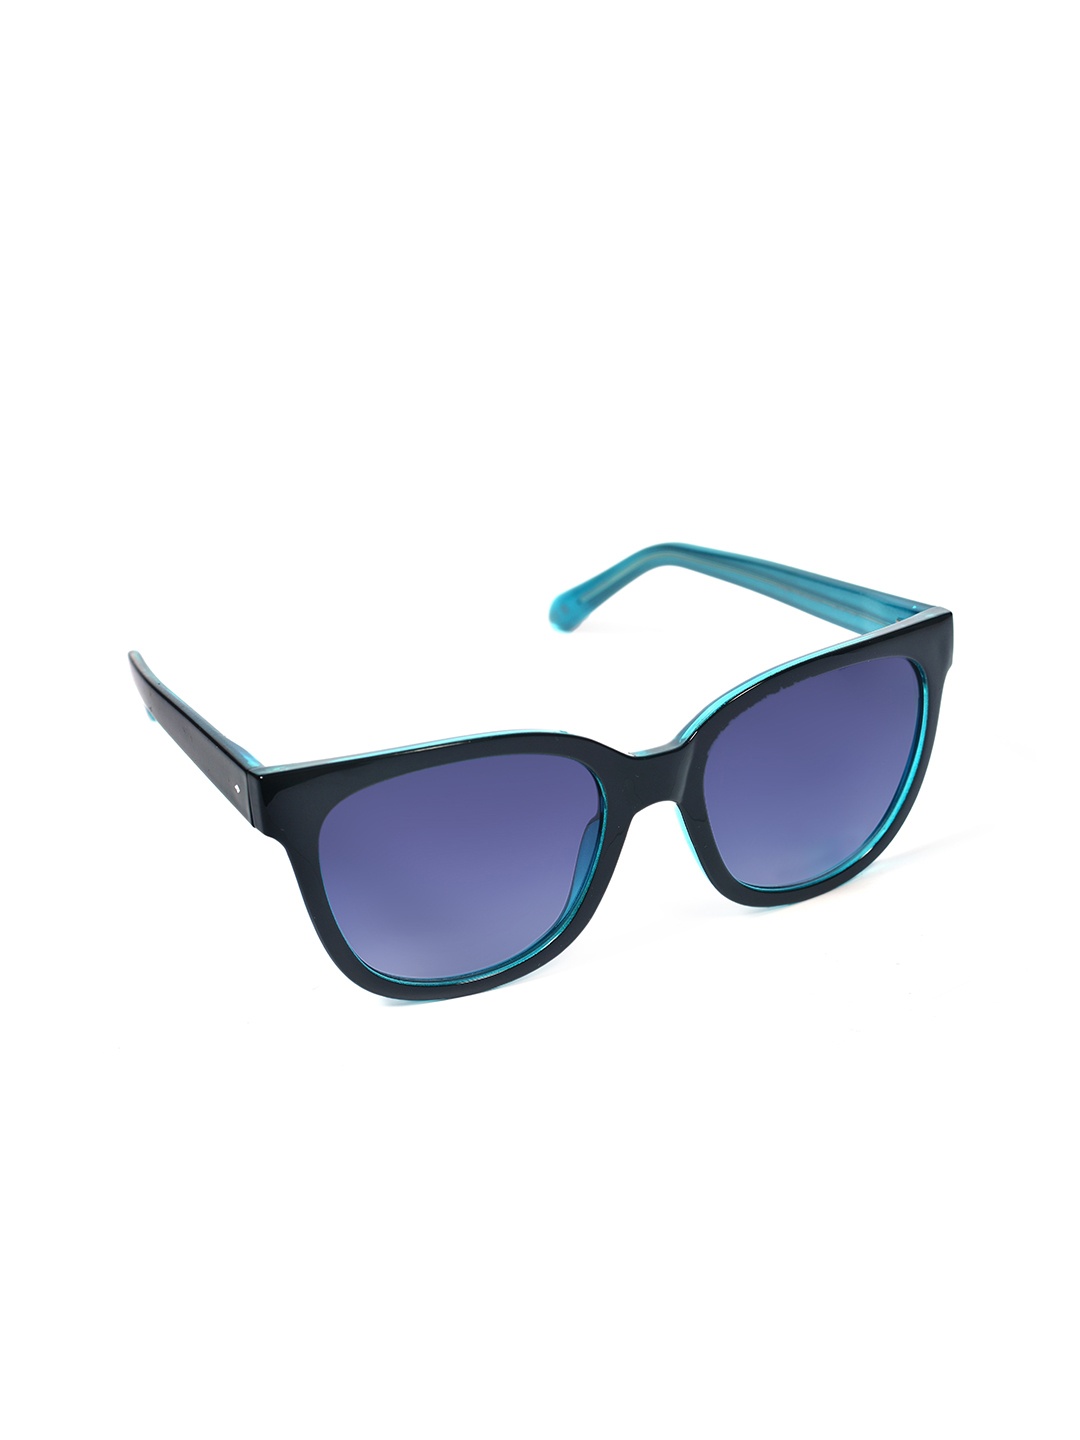 

Fossil Women Other Sunglasses with UV Protected Lens 16426952823, Blue